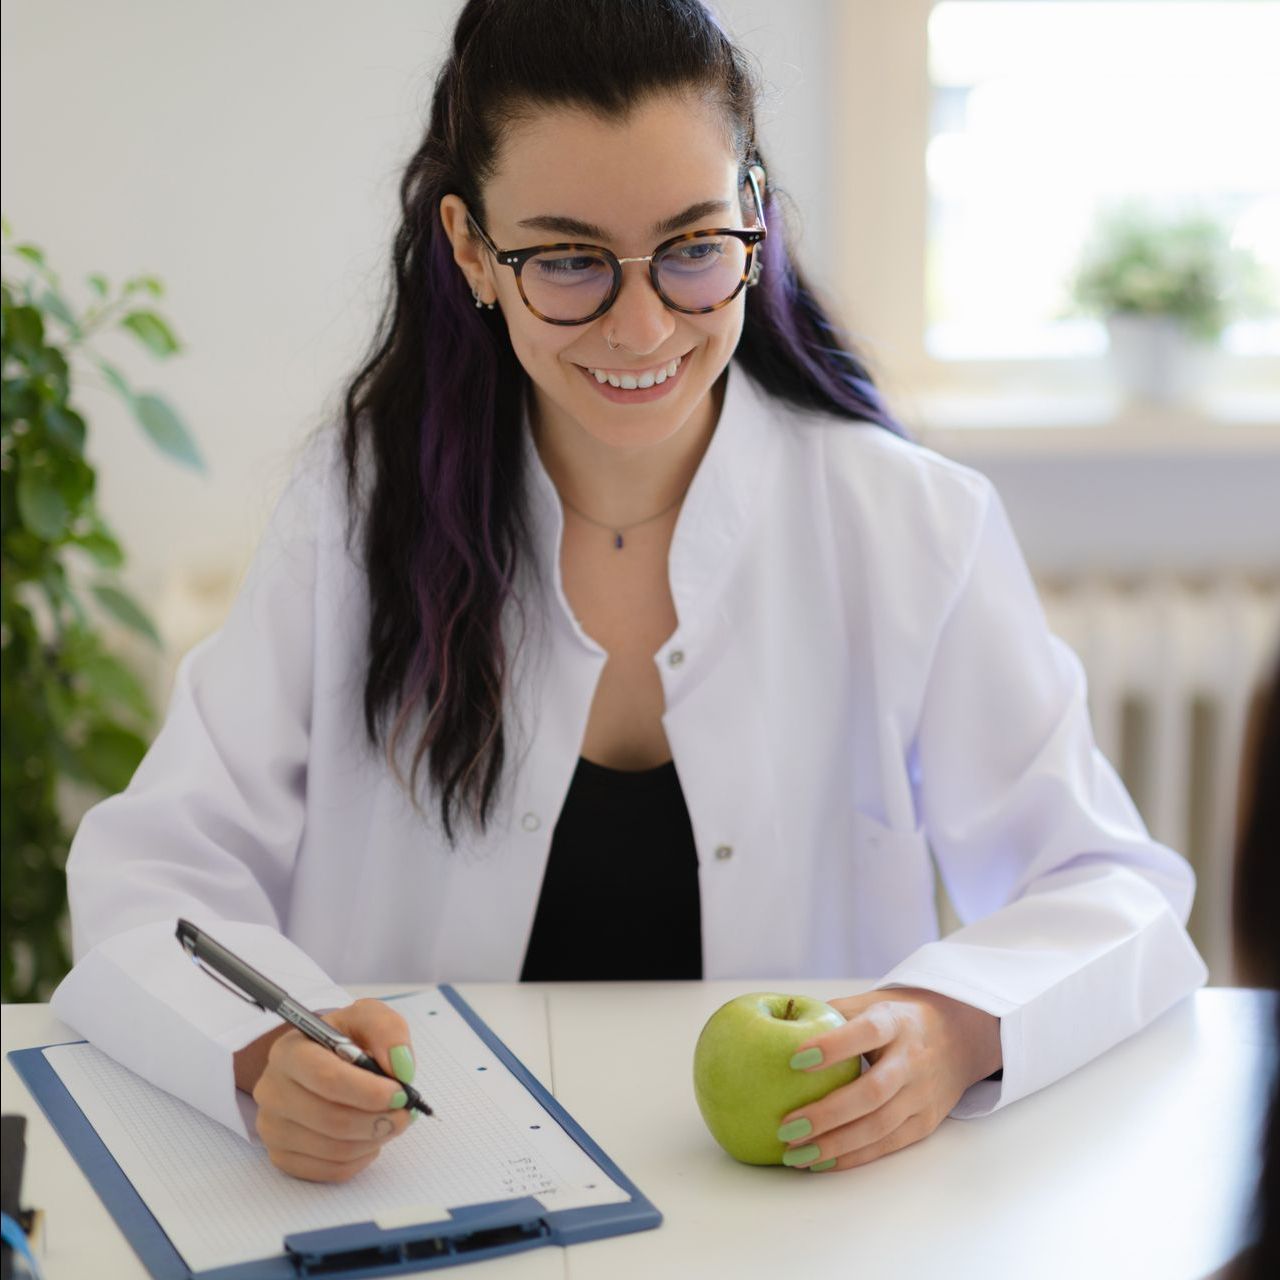 a woman in a lab coat is writing on a clipboard while holding an apple .